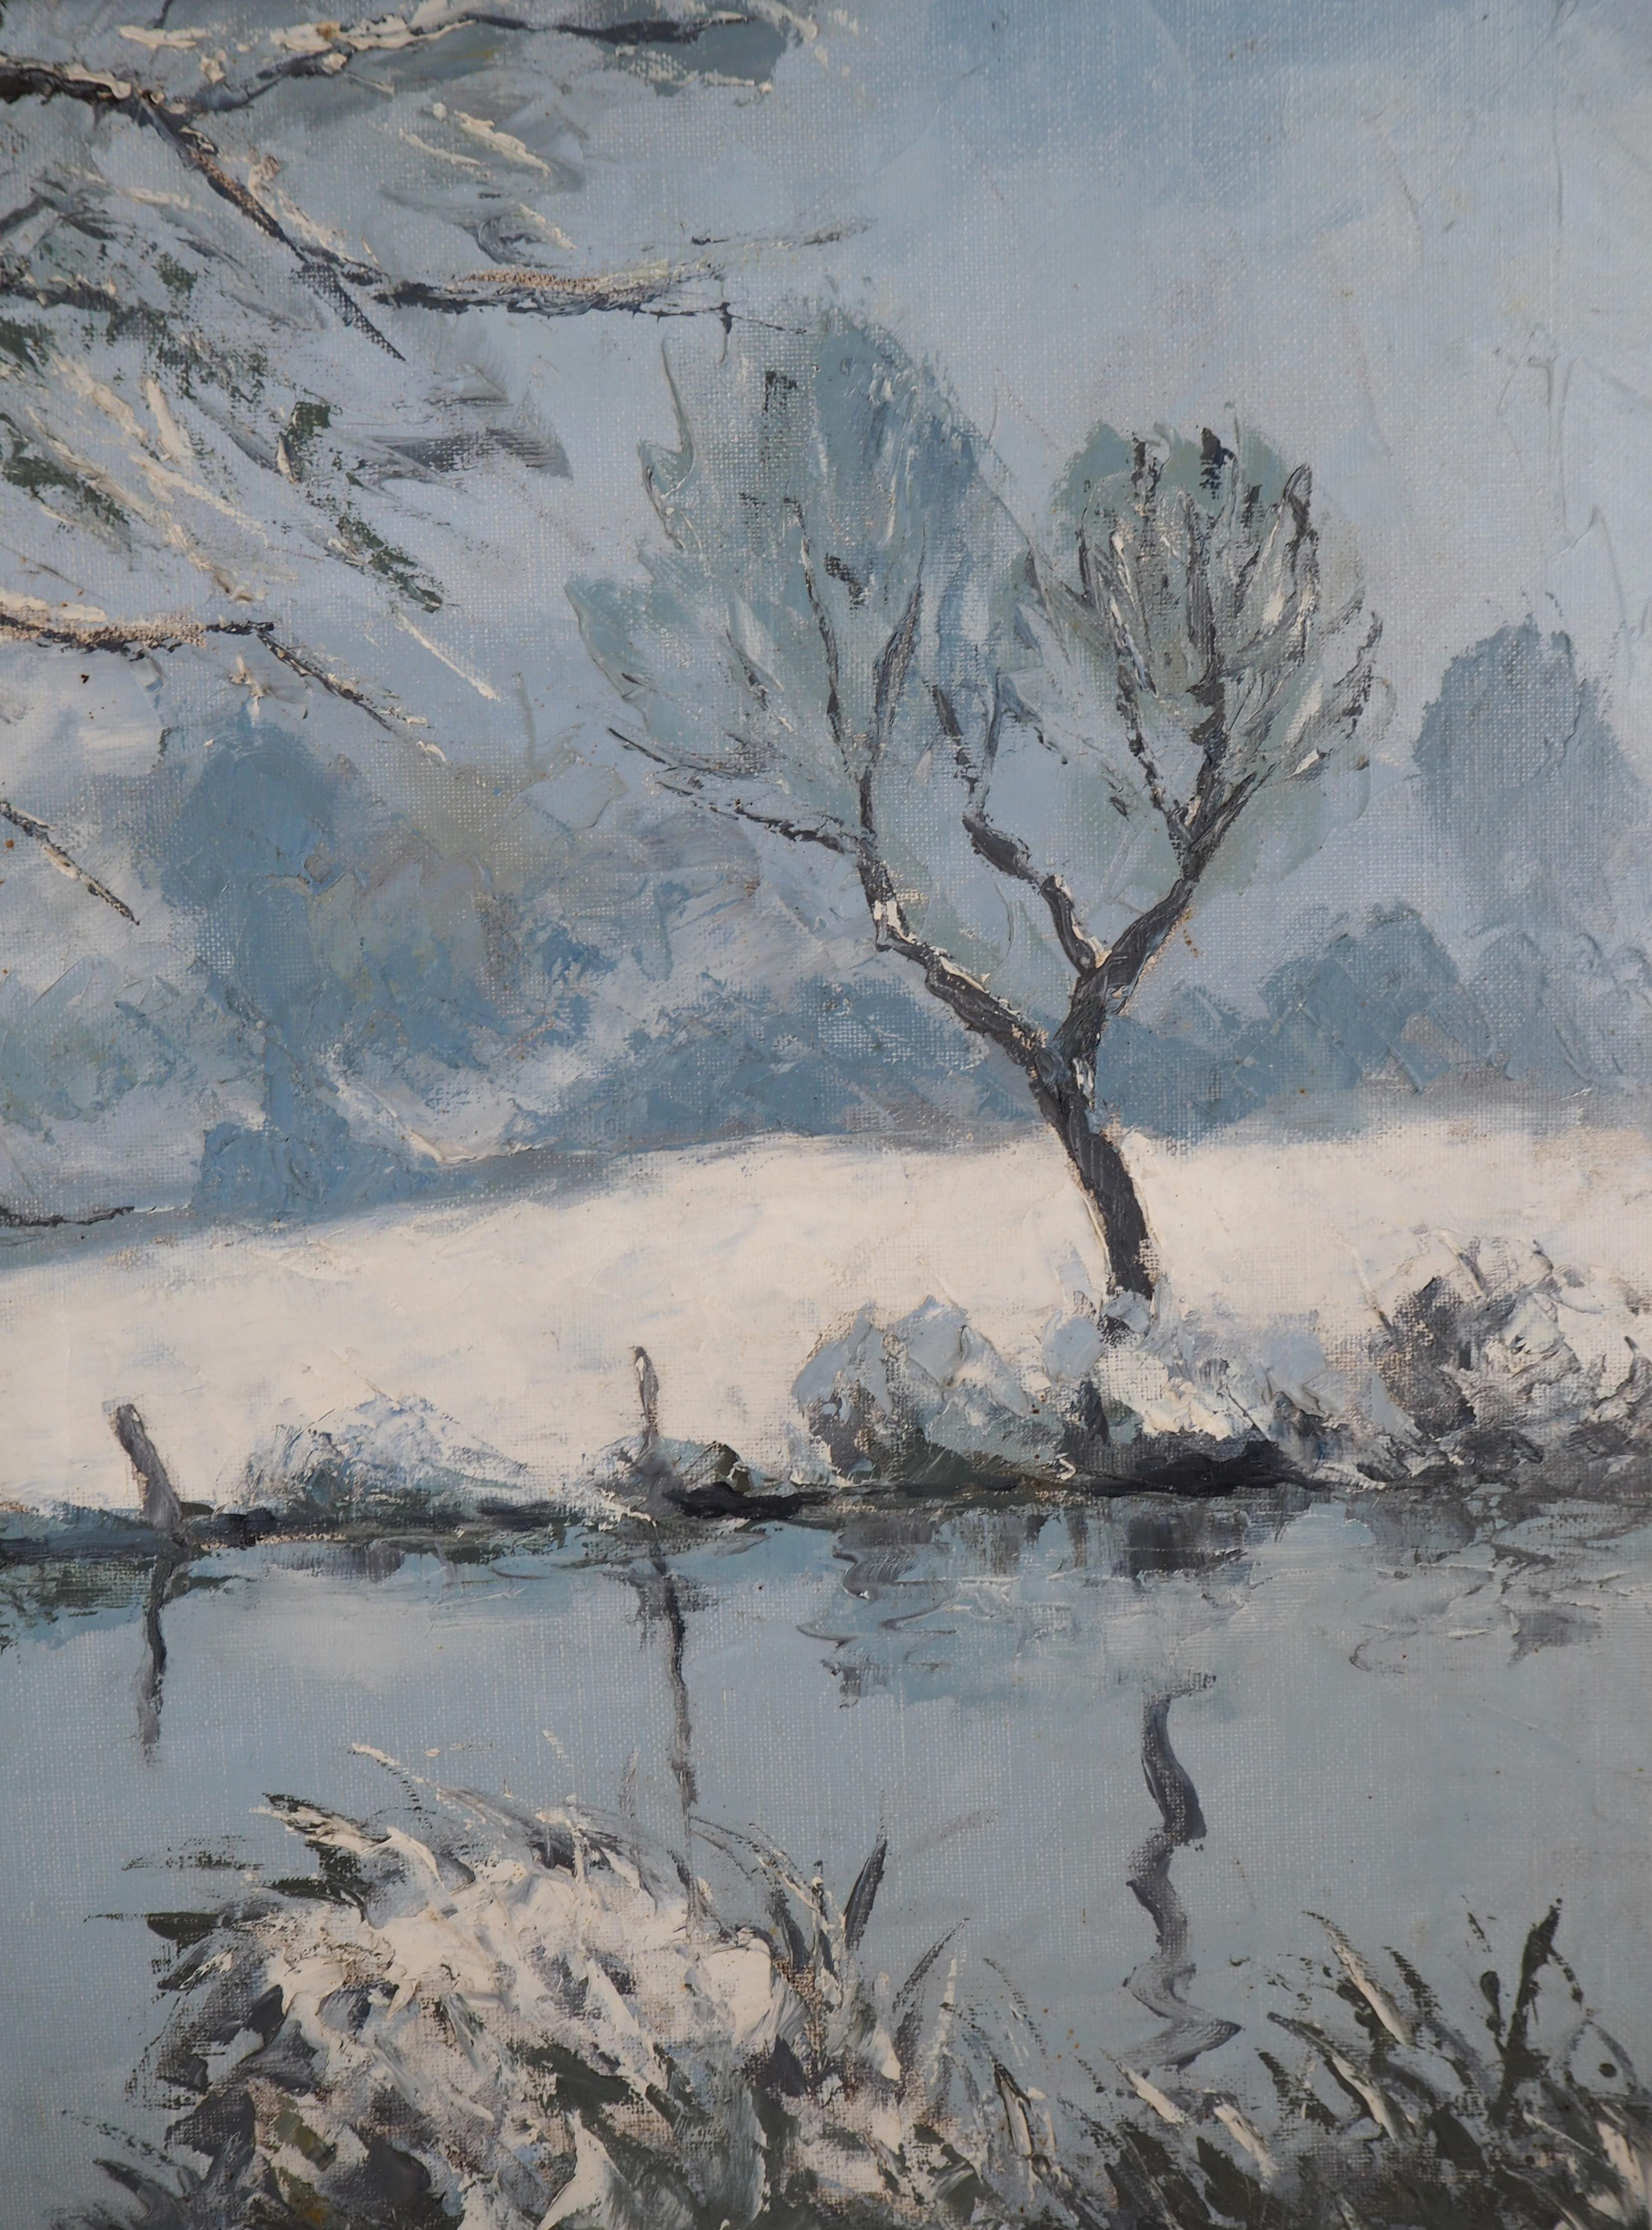 Normandy : Frozen Lake and Snow - Original oil on canvas, Handsigned 1